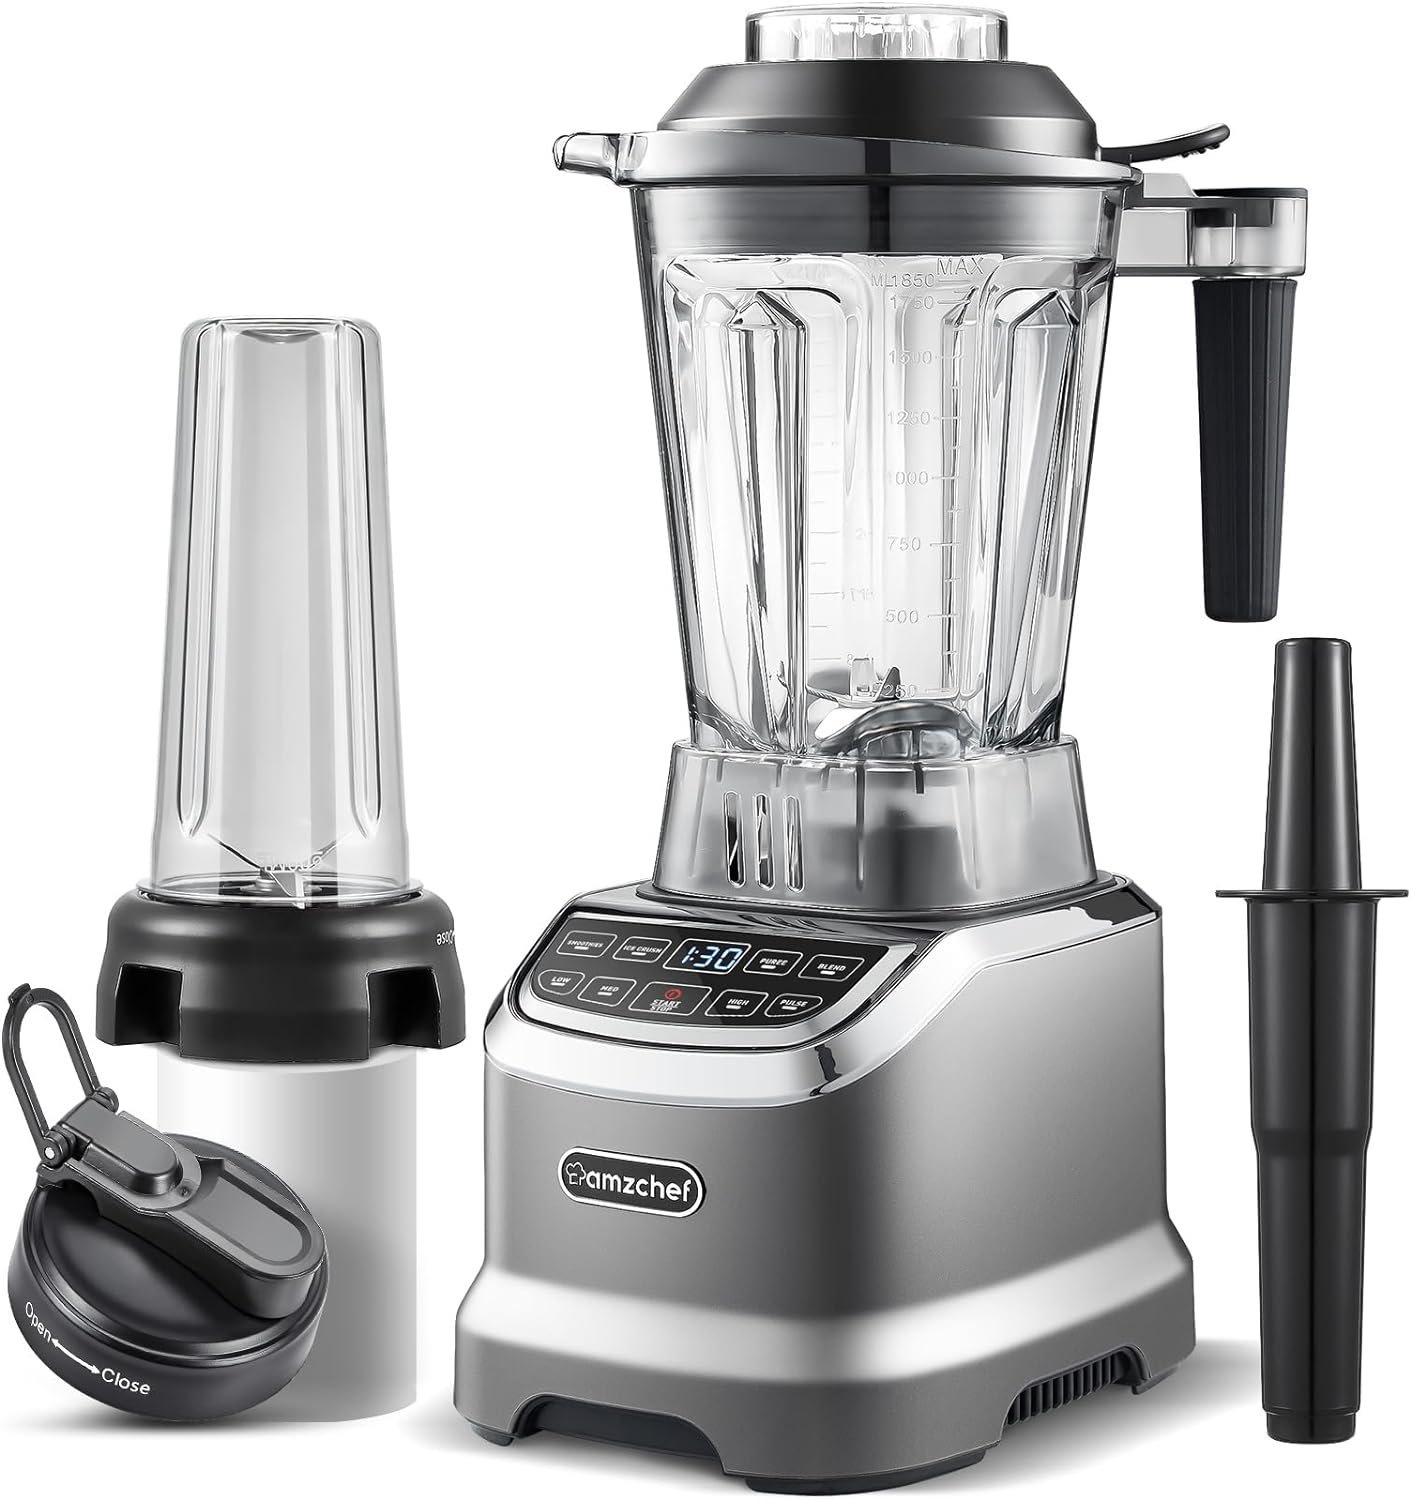 AMZCHEF Smoothie Countertop Blender Review